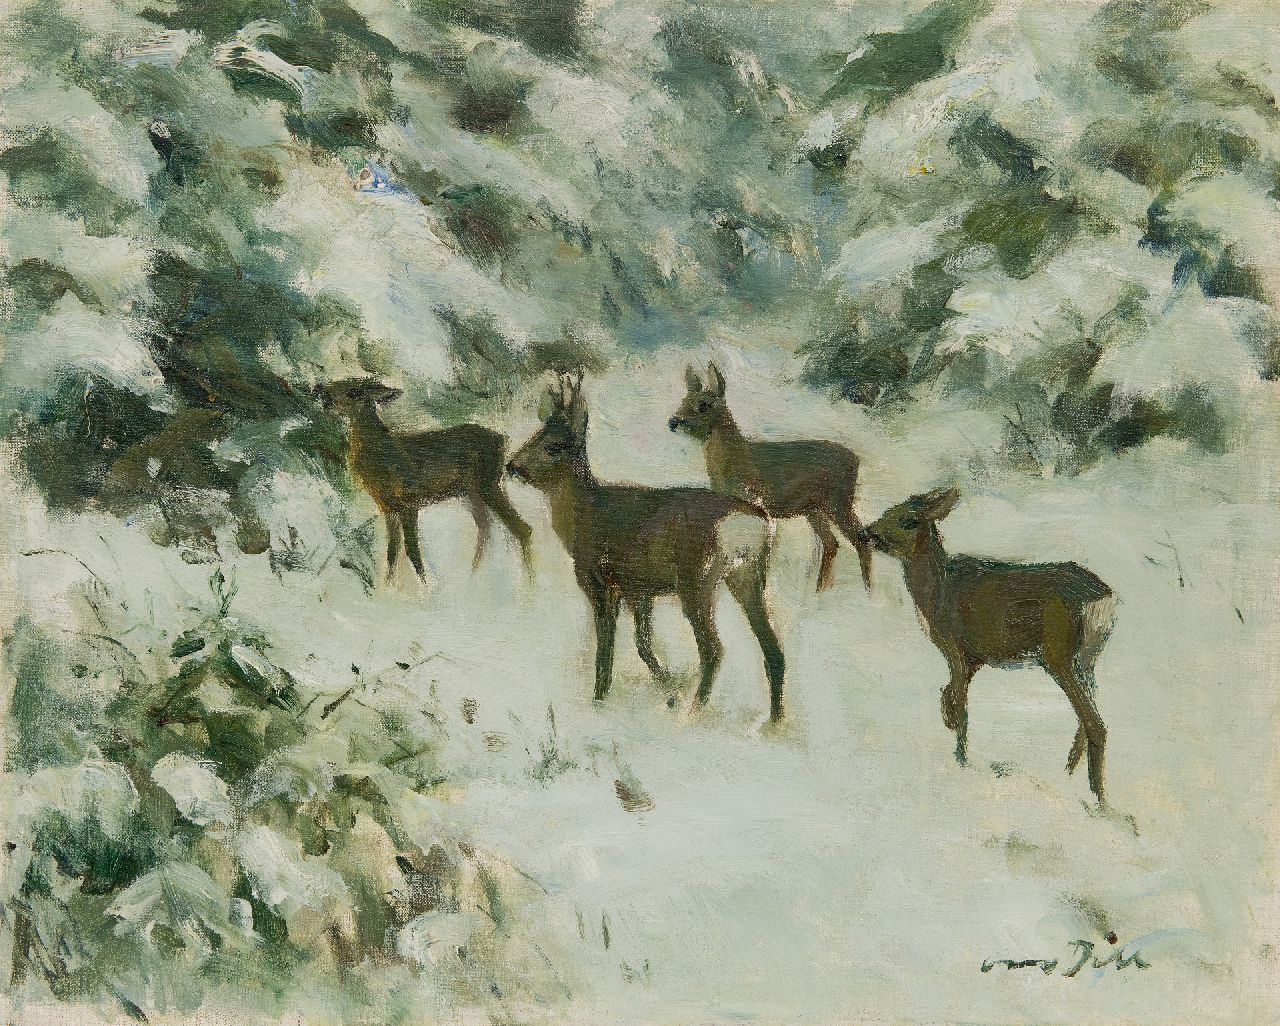 Otto Carl Wilhelm Dill | Deer in the snow, oil on canvas, 40.2 x 50.0 cm, signed l.r.